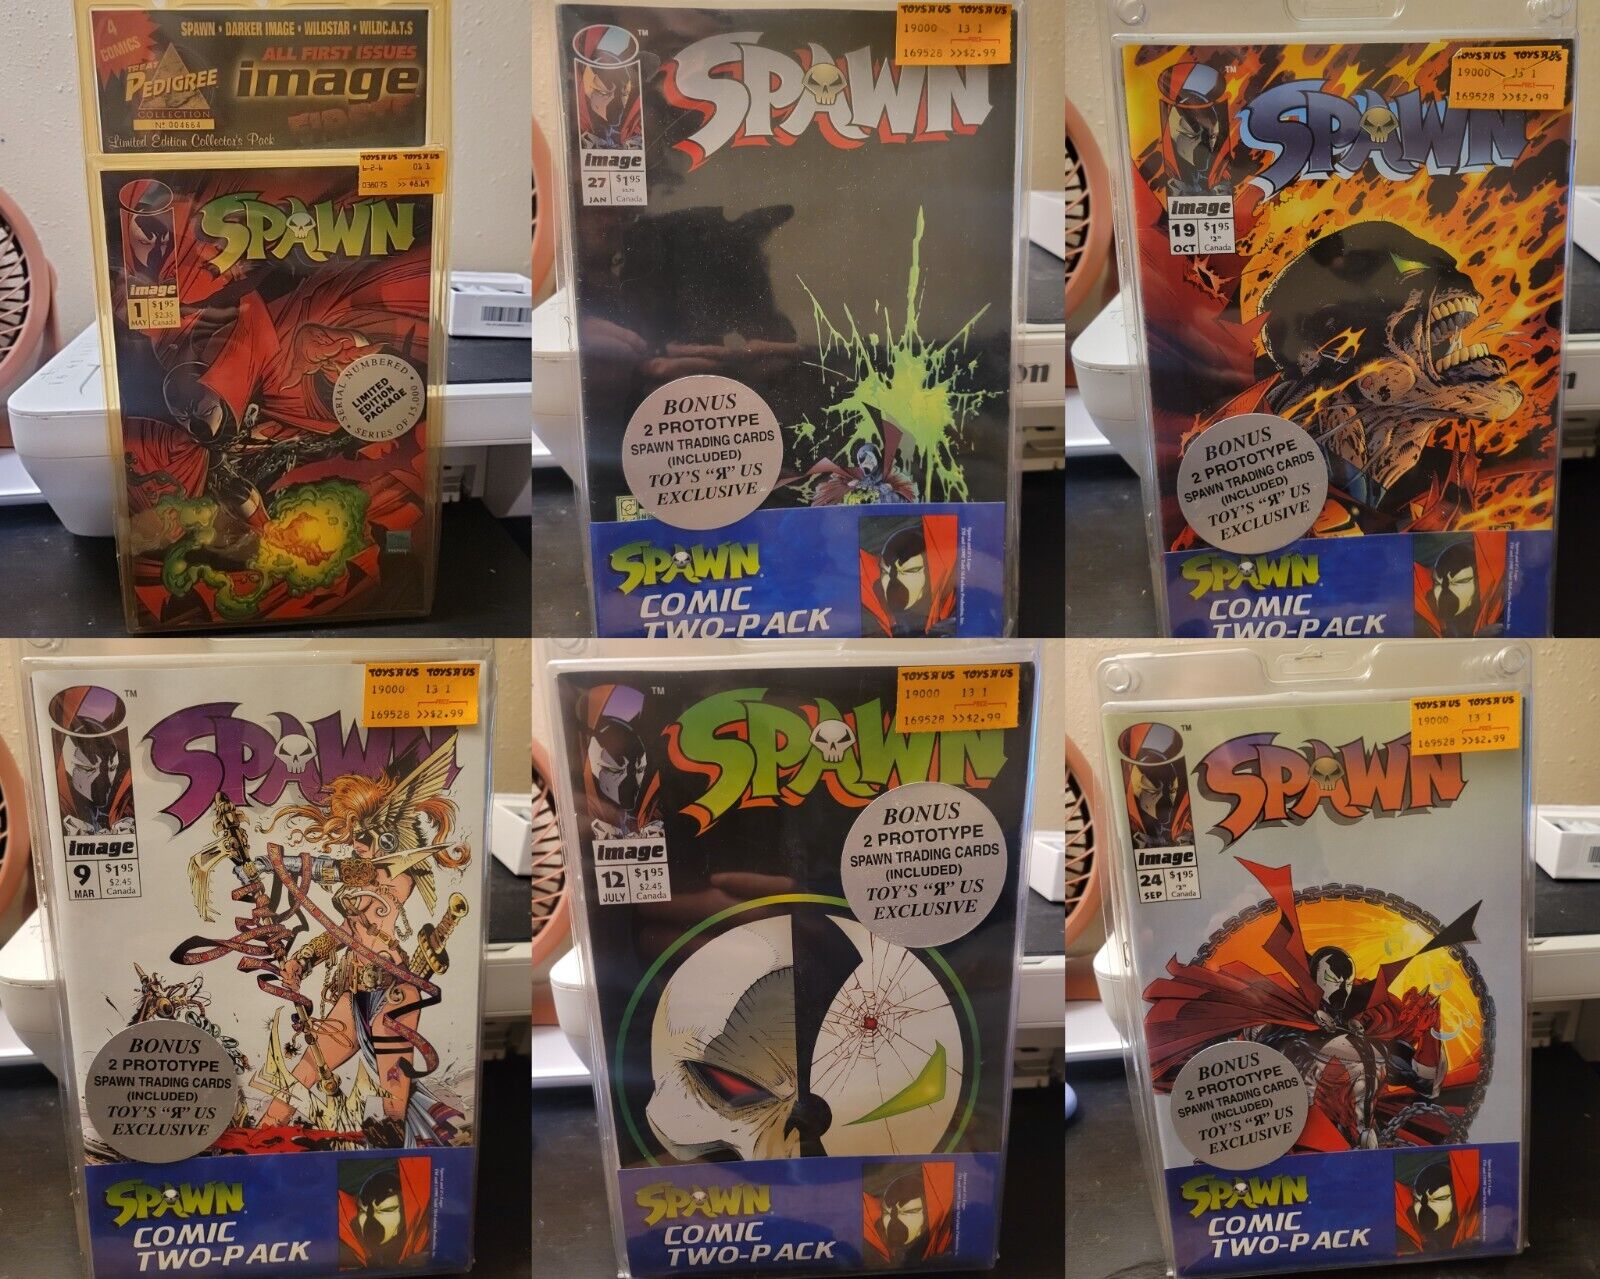 All First Issues Image Firsts Treat Pedigree Collection+Spawn Comic Two-Packs